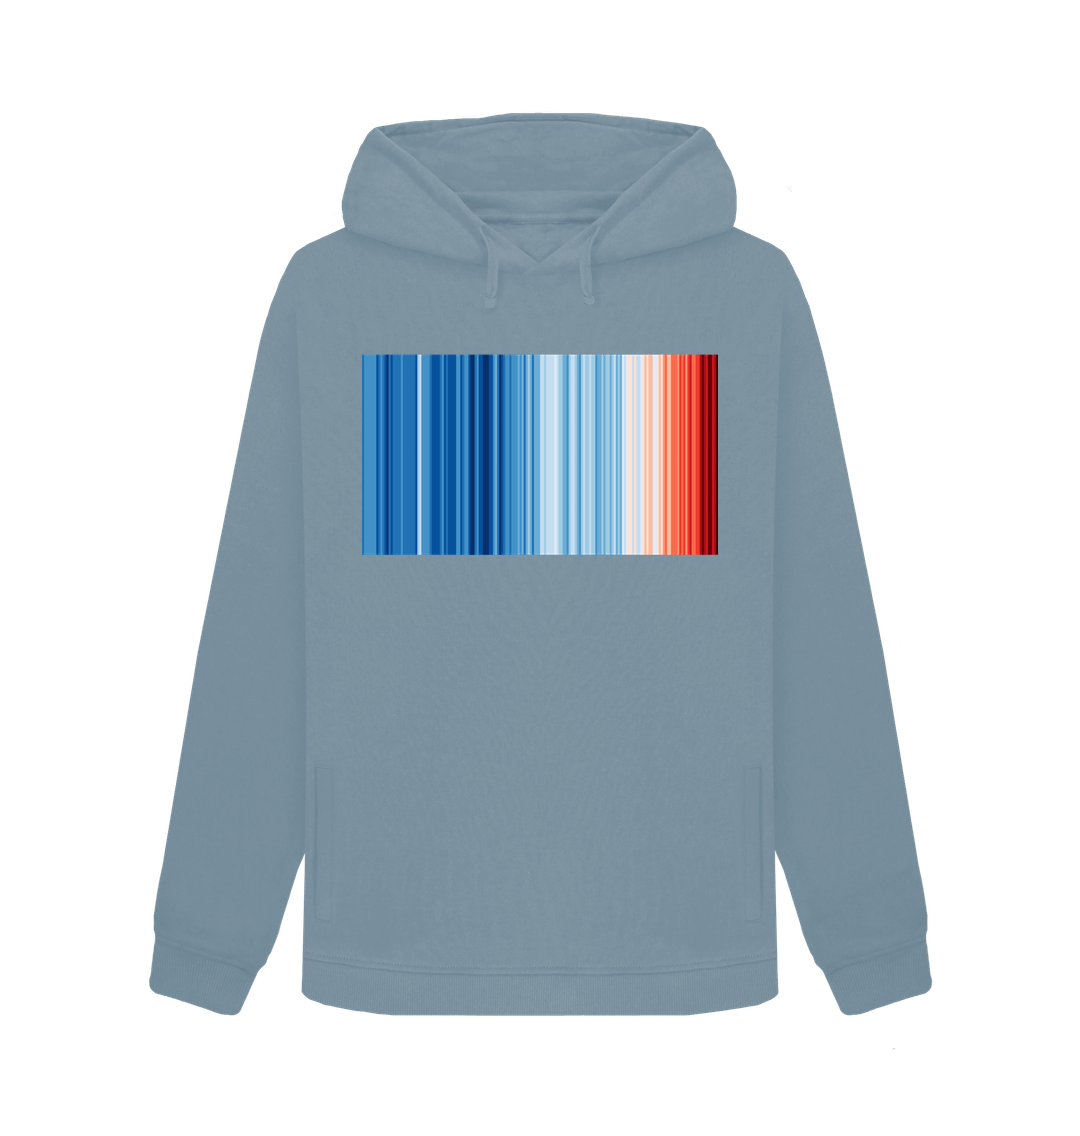 Women's #ShowYourStripes pullover hoodie